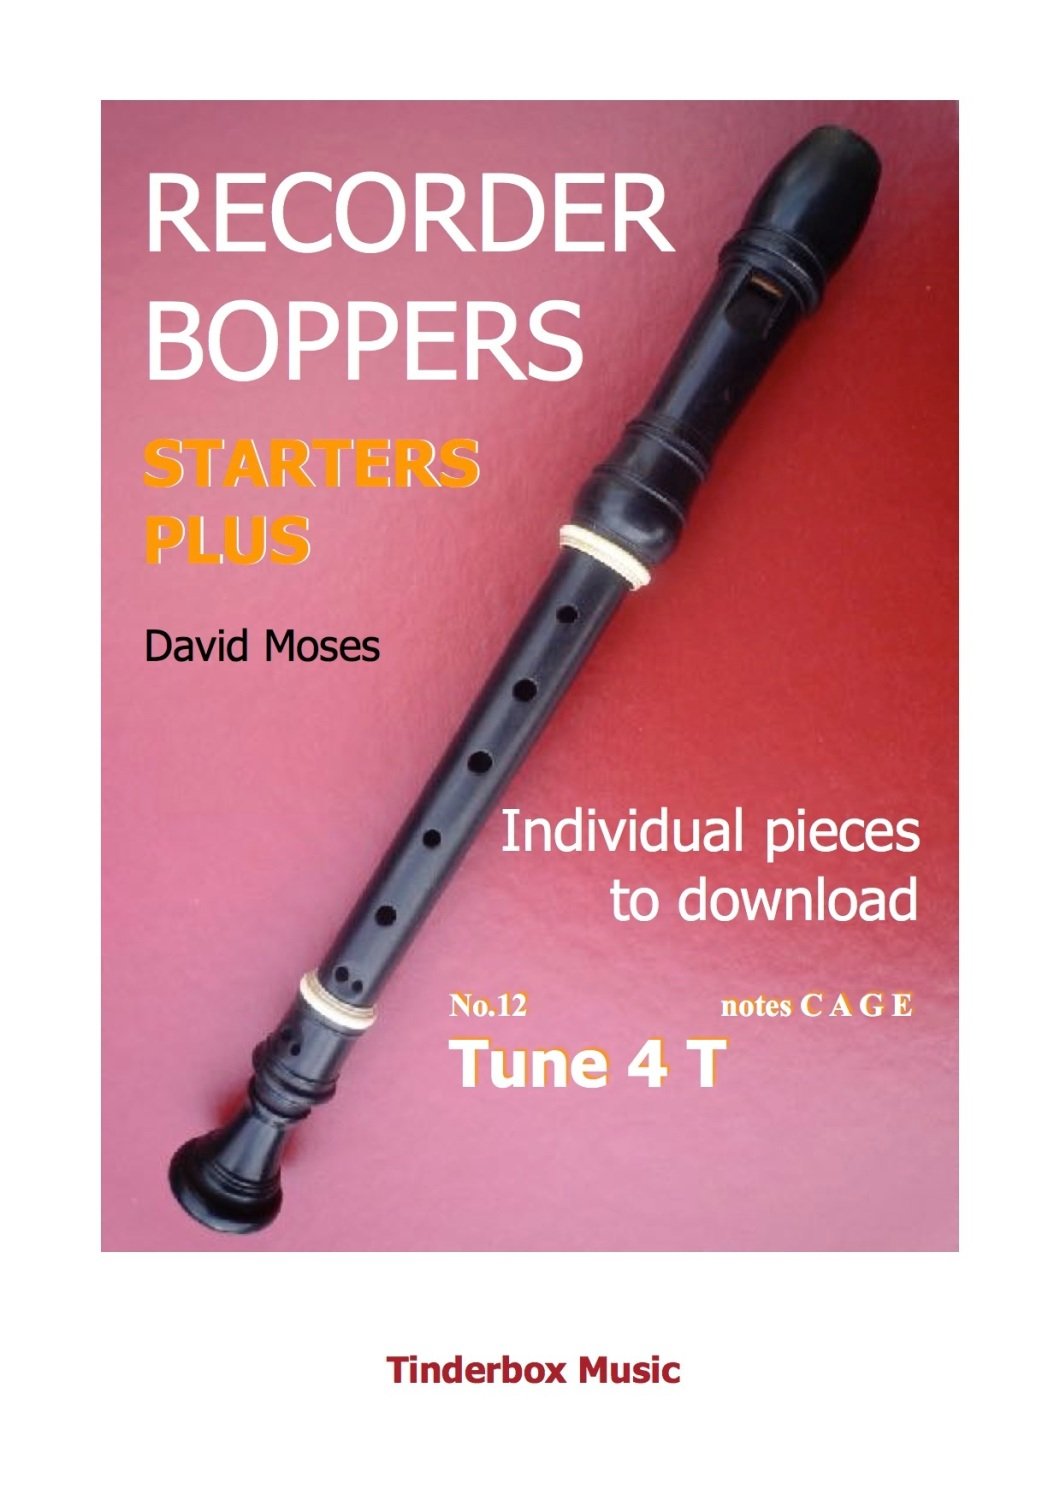 STARTERS PLUS individual pieces no.12  TUNE 4 T  download